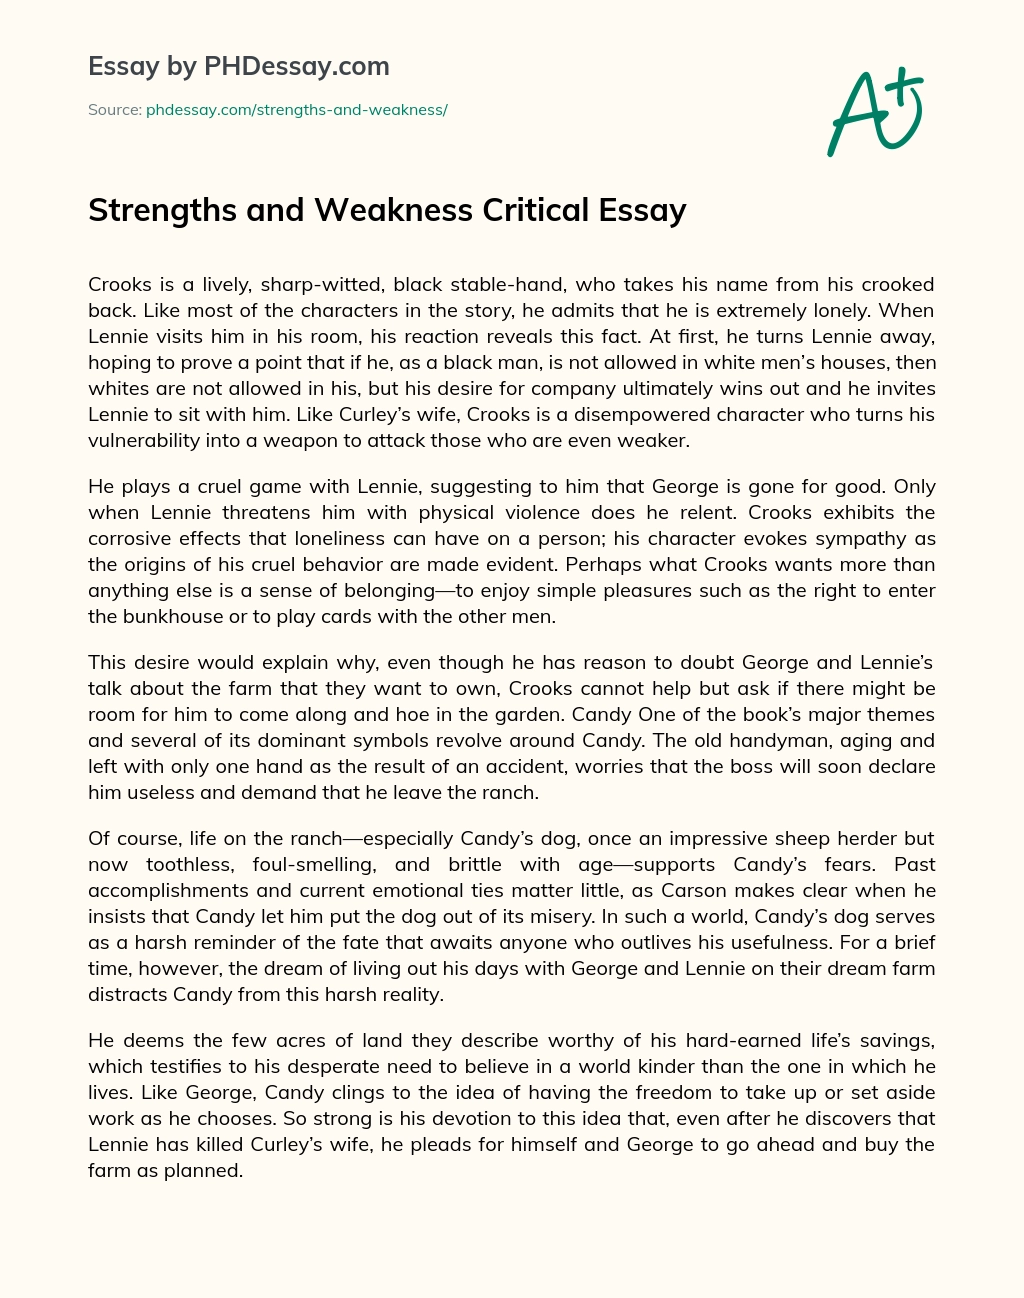 Strengths and Weakness Critical Essay essay